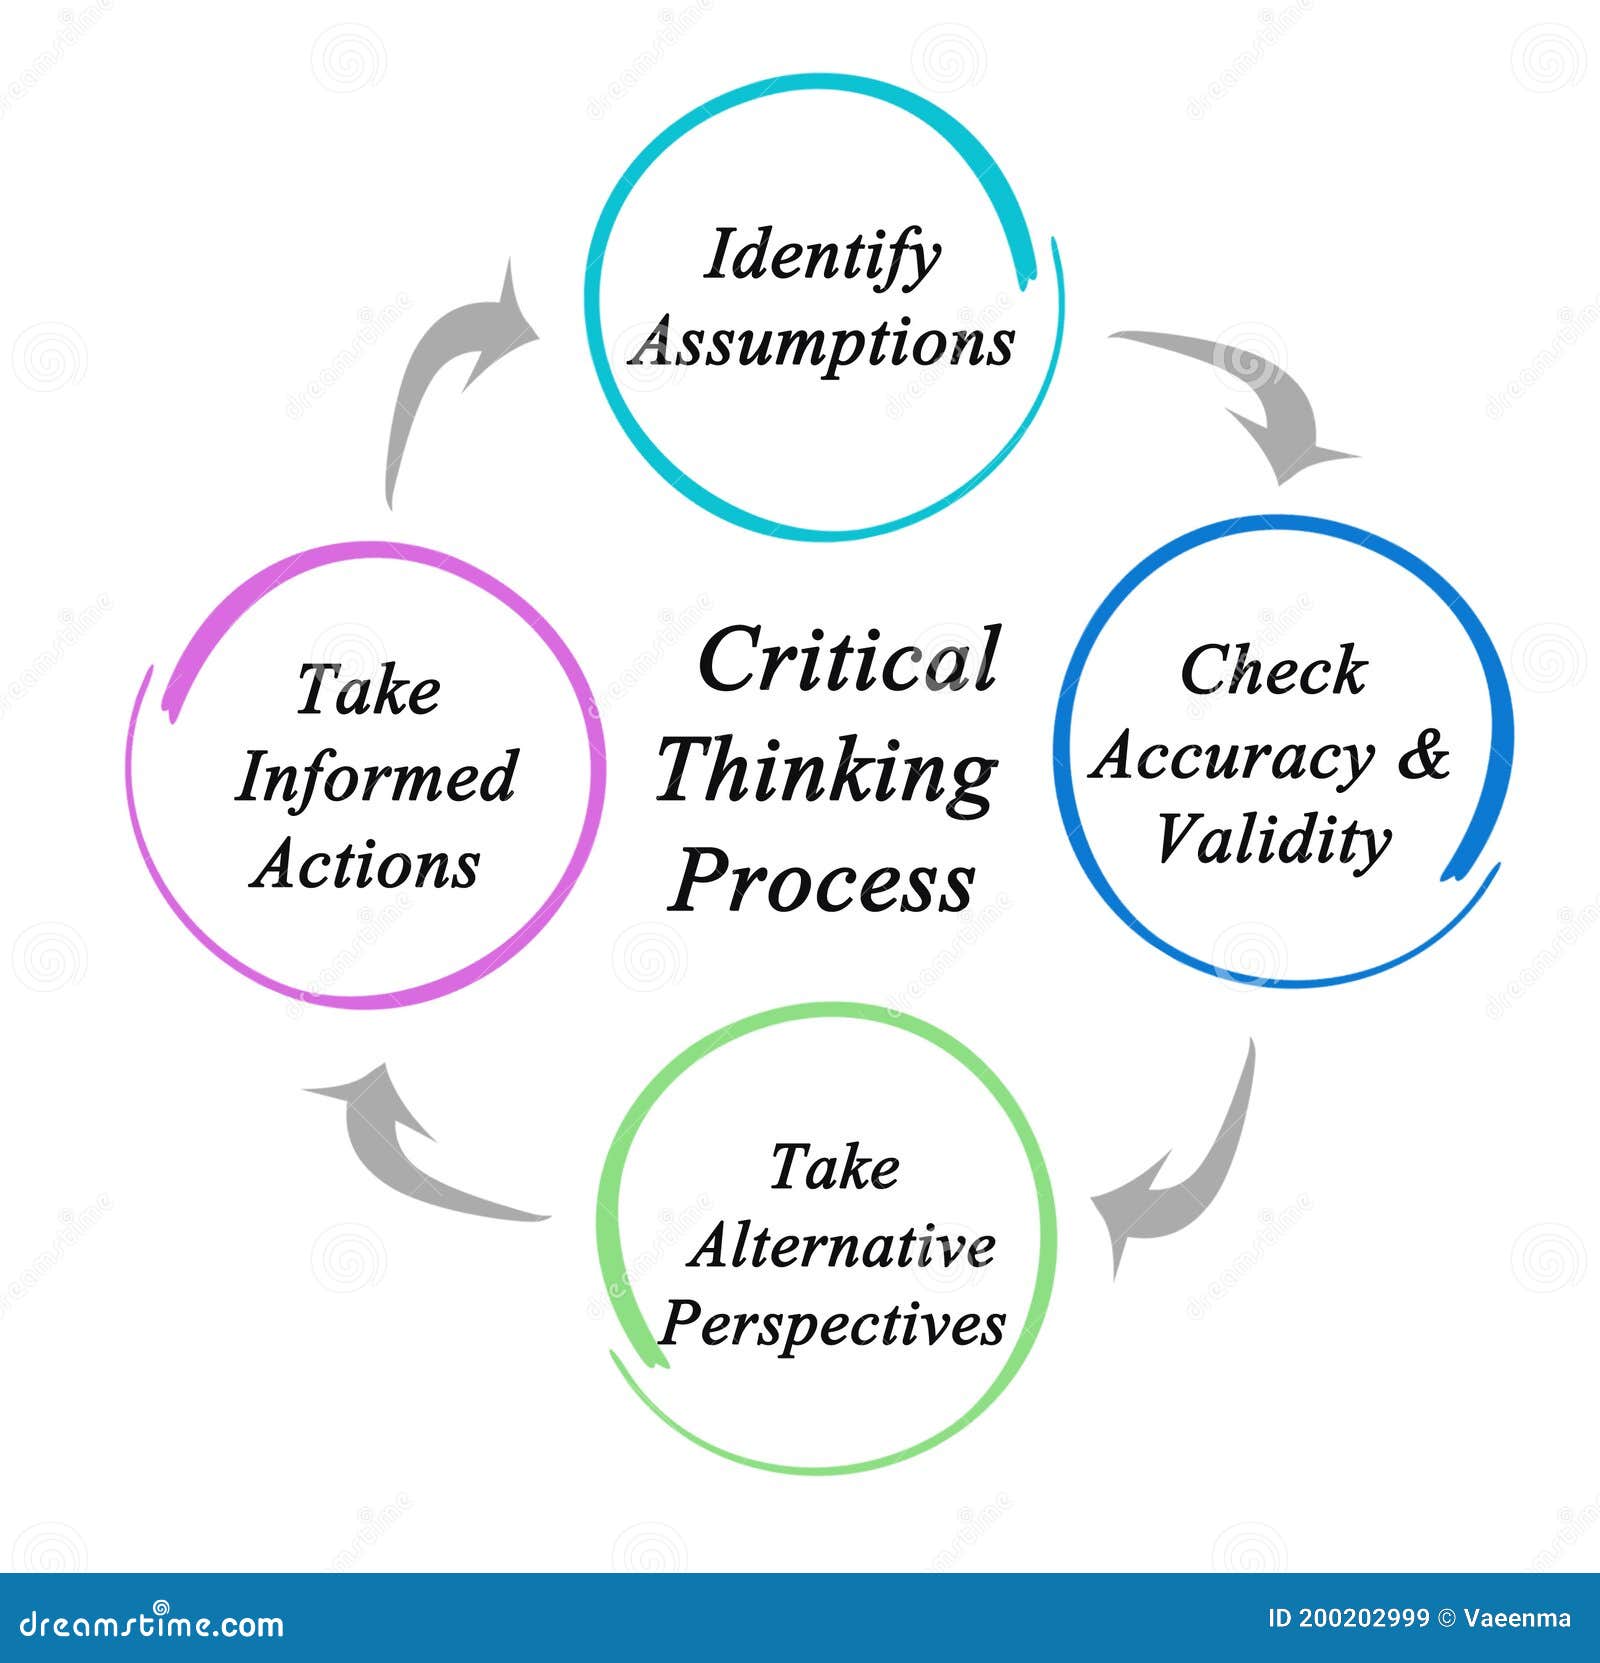 steps of the critical thinking process into the correct order